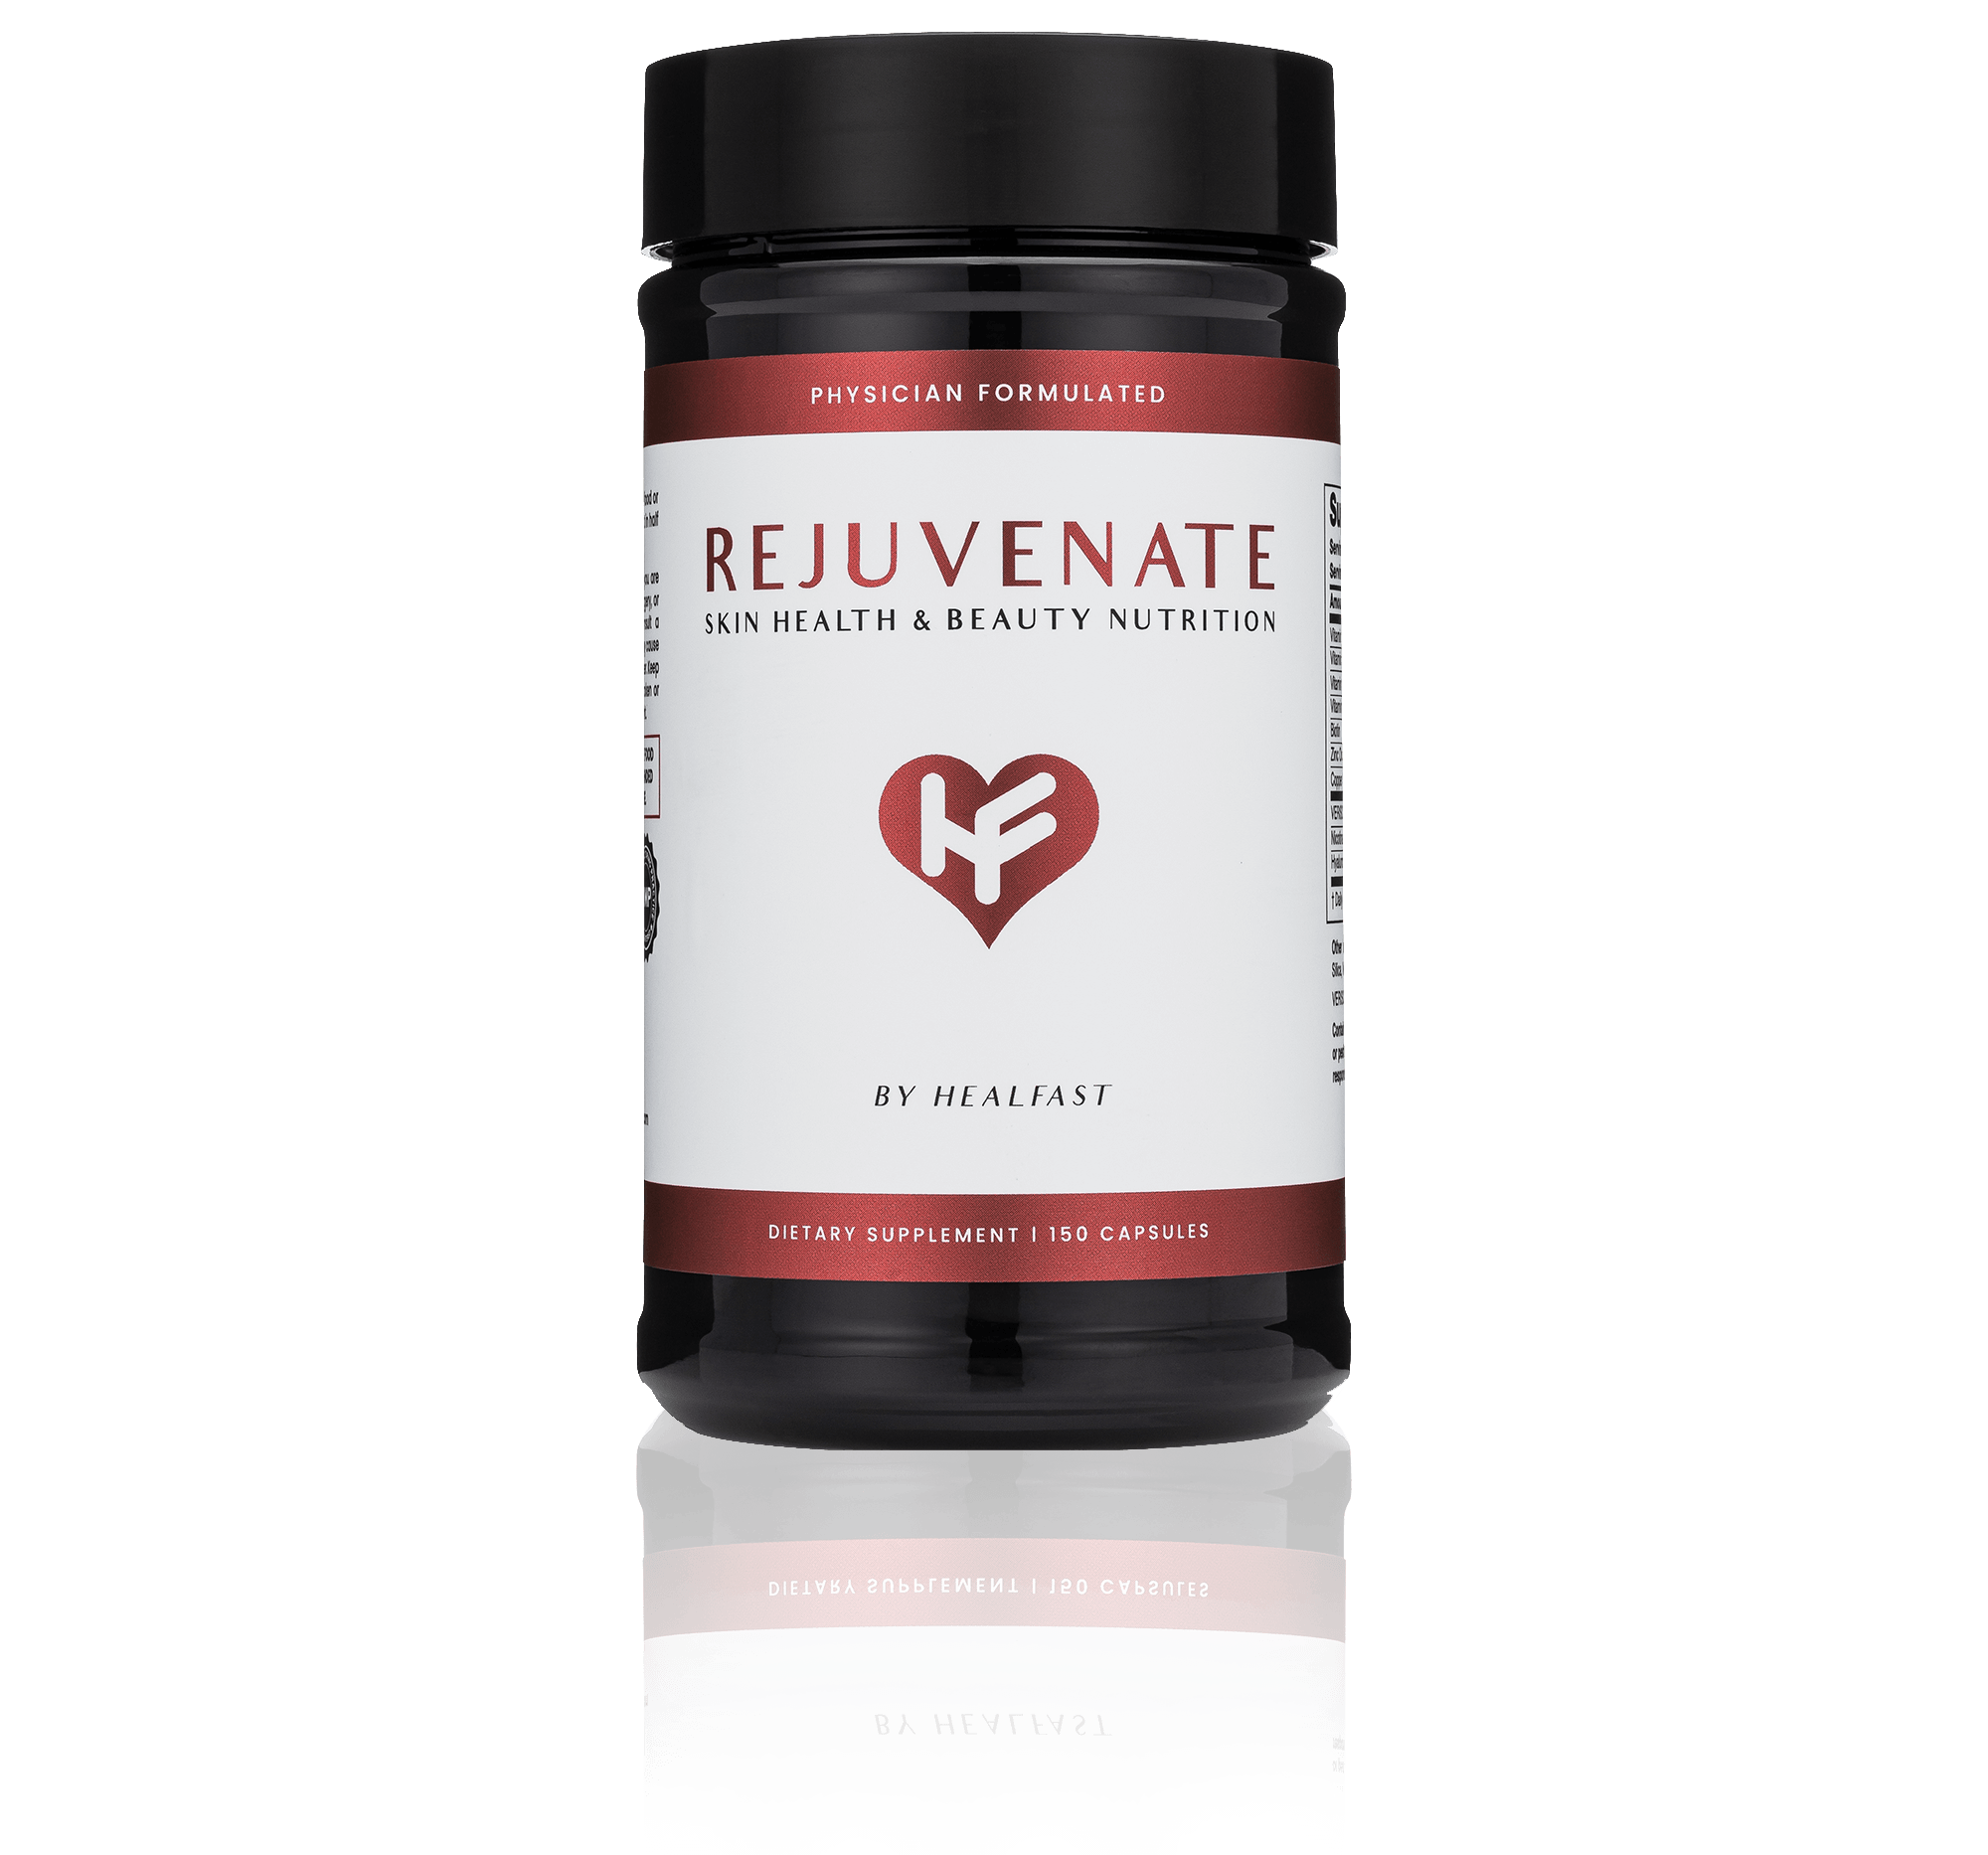 <p>Add HealFast Rejuvenate: Anti-Aging Skin & Beauty Supplement and <strong>Save 30%</strong></p>